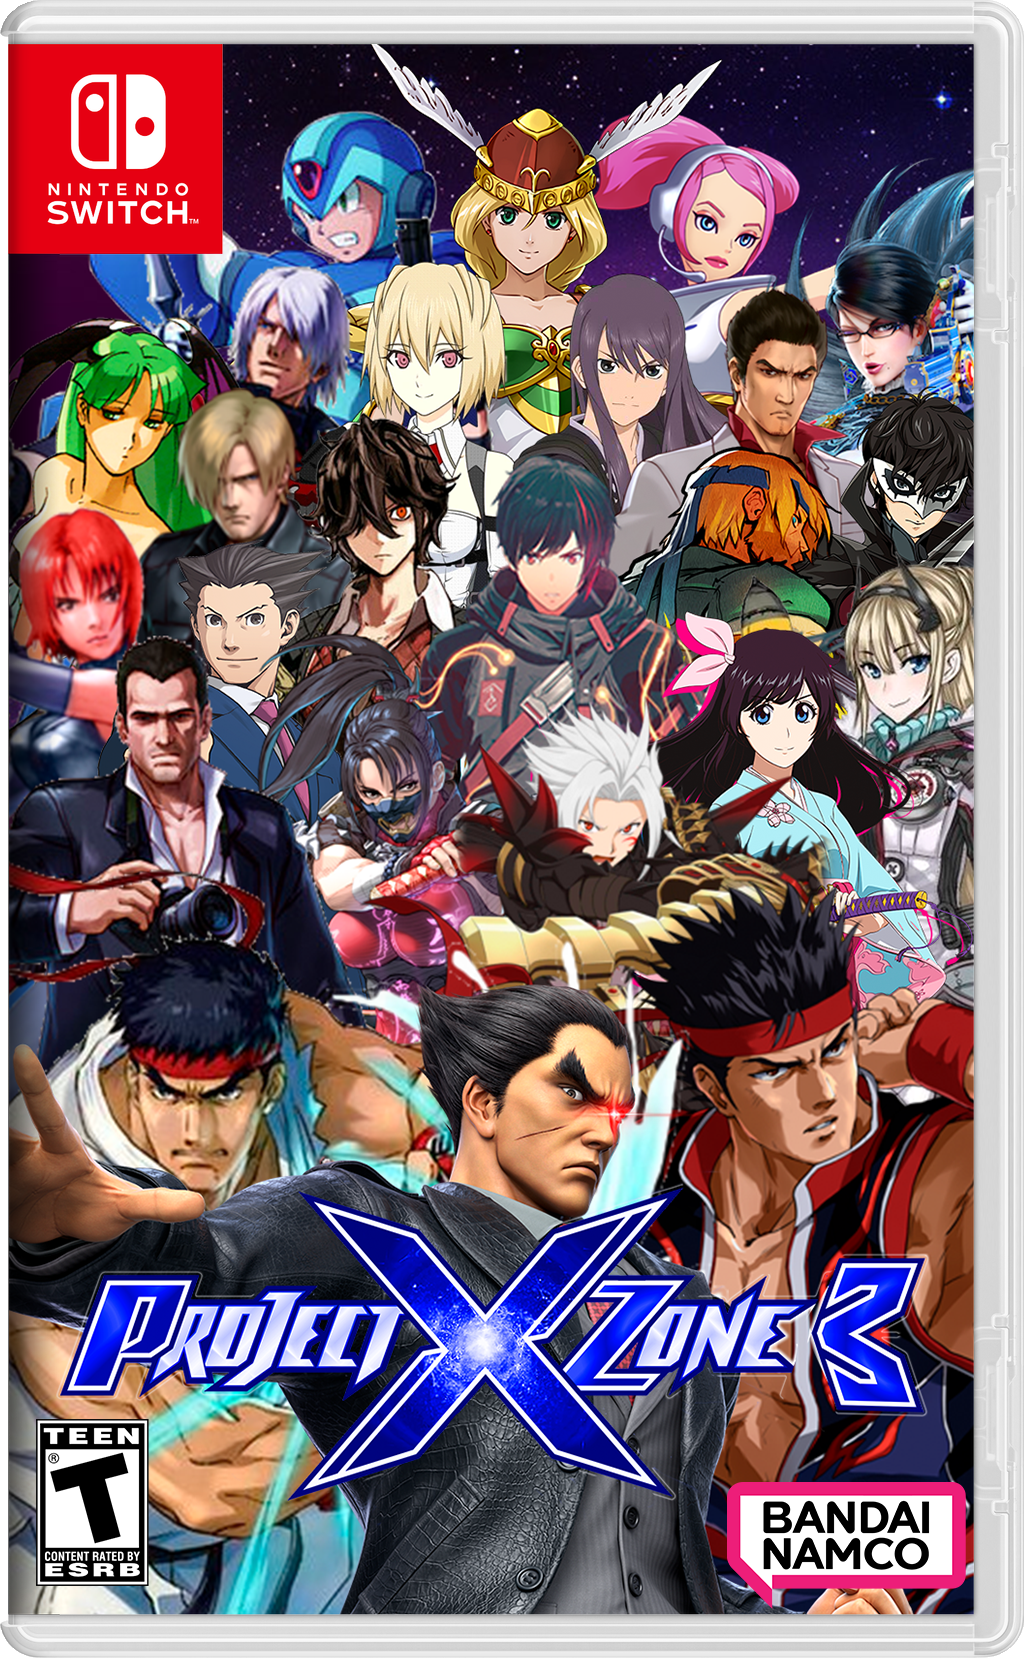 download project x zone 3